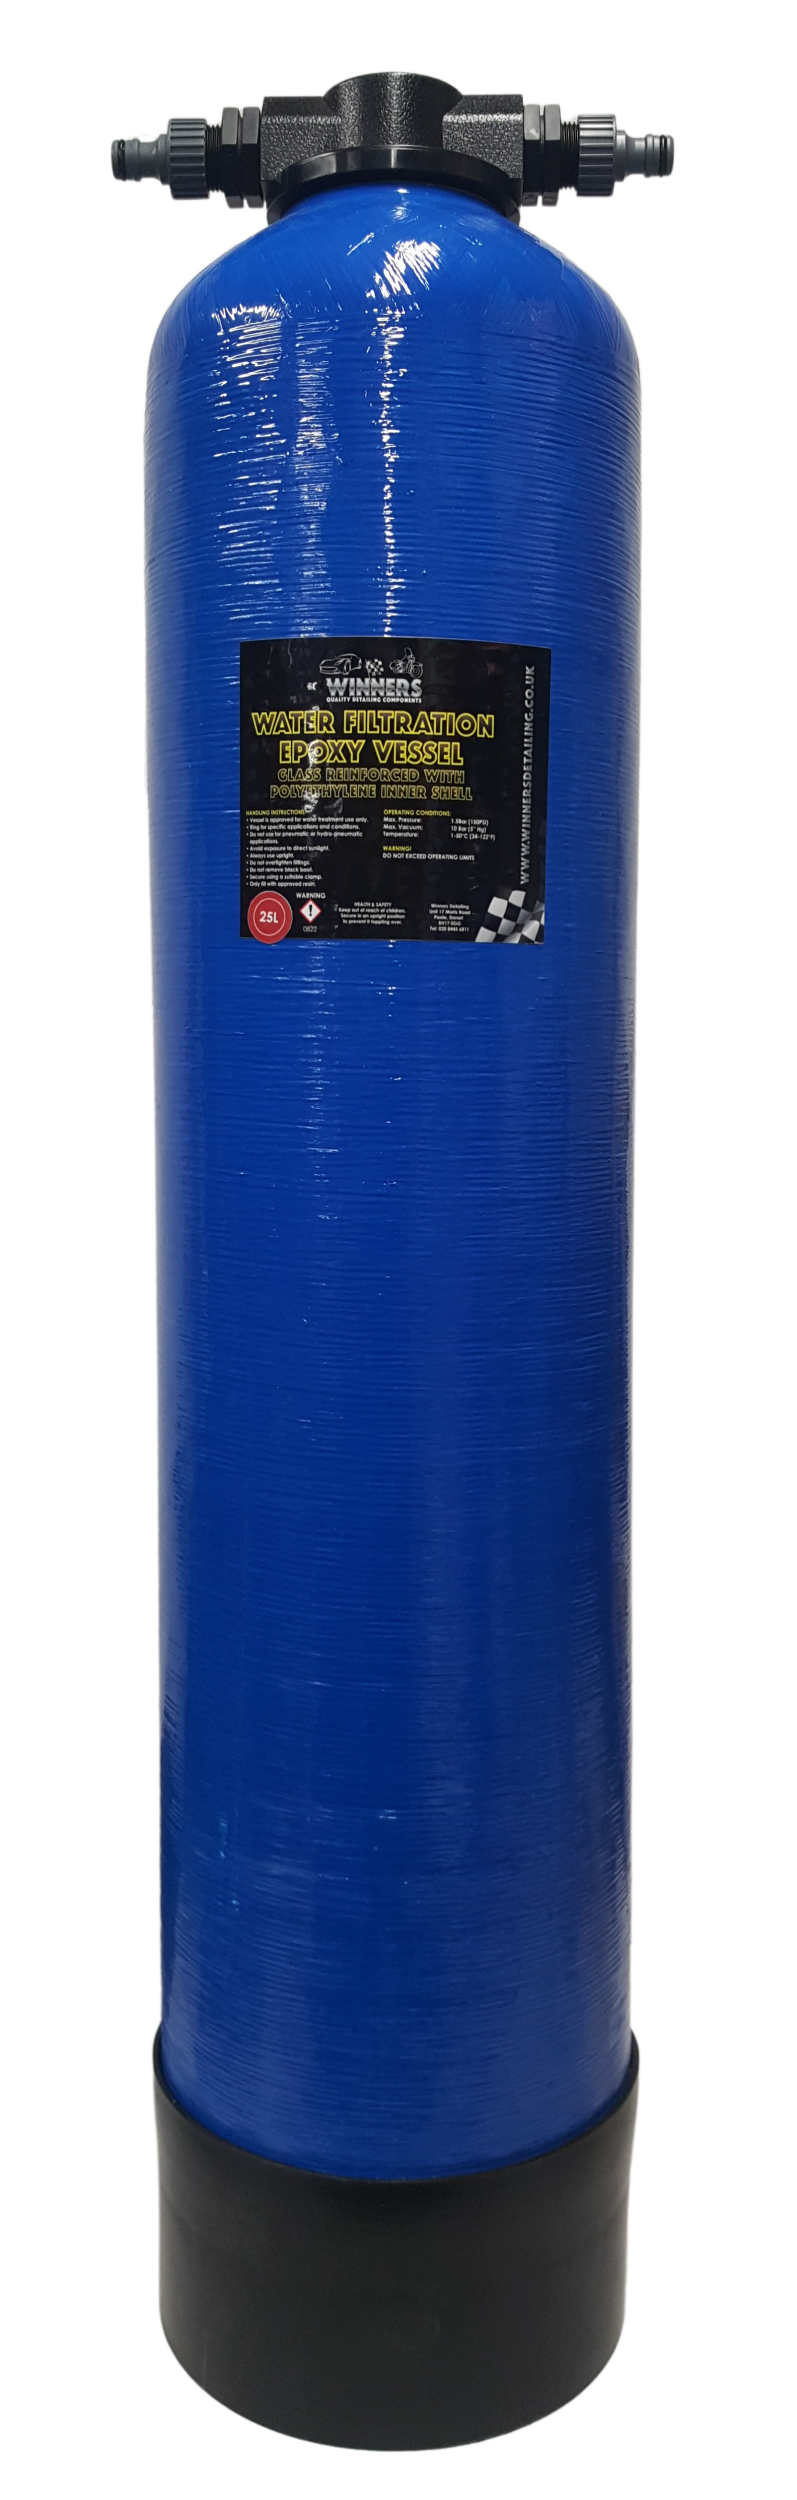 DI Water Filter Pressure Vessel 25 Litres with Hose Lock Fittings - High-Capacity Water Filter System for Cleaning